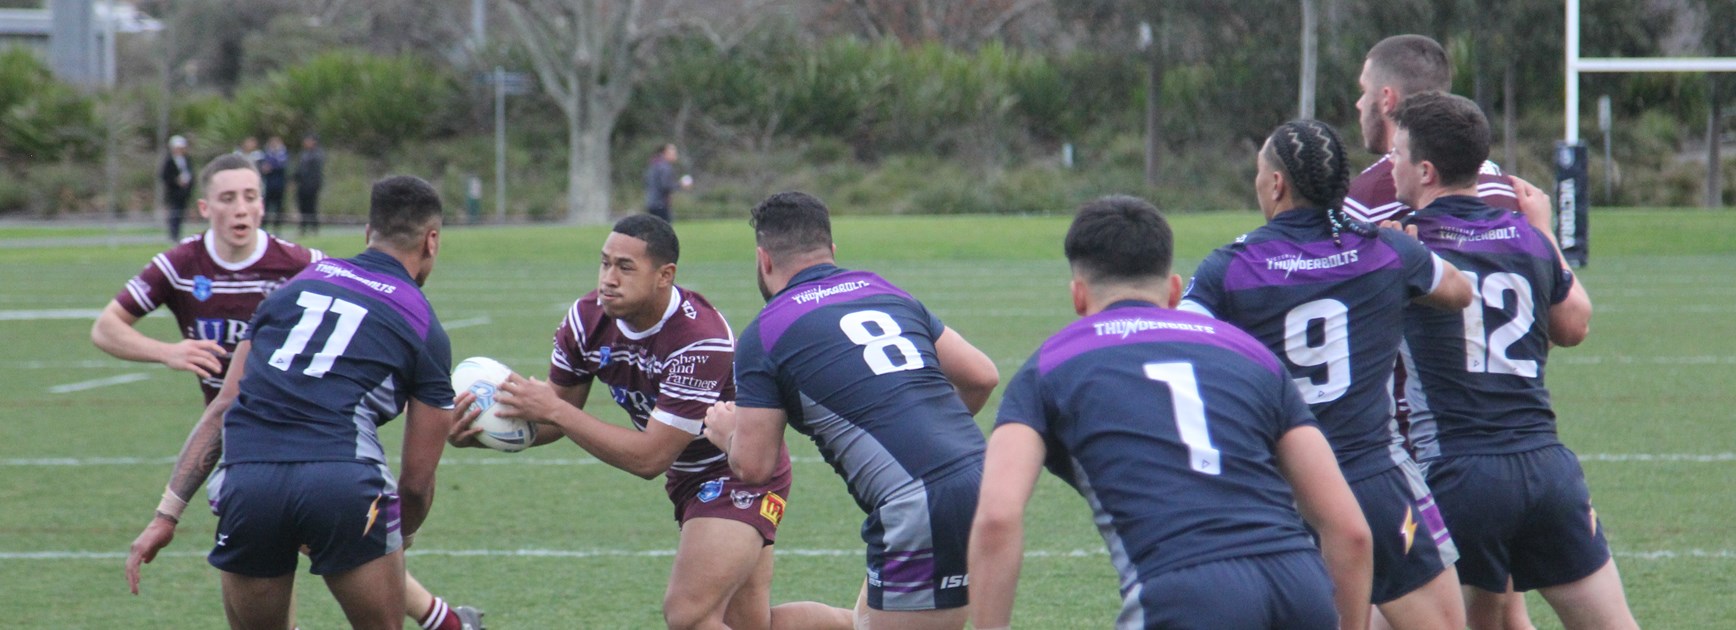 Sea Eagles go down to Thunderbolts in Jersey Flegg